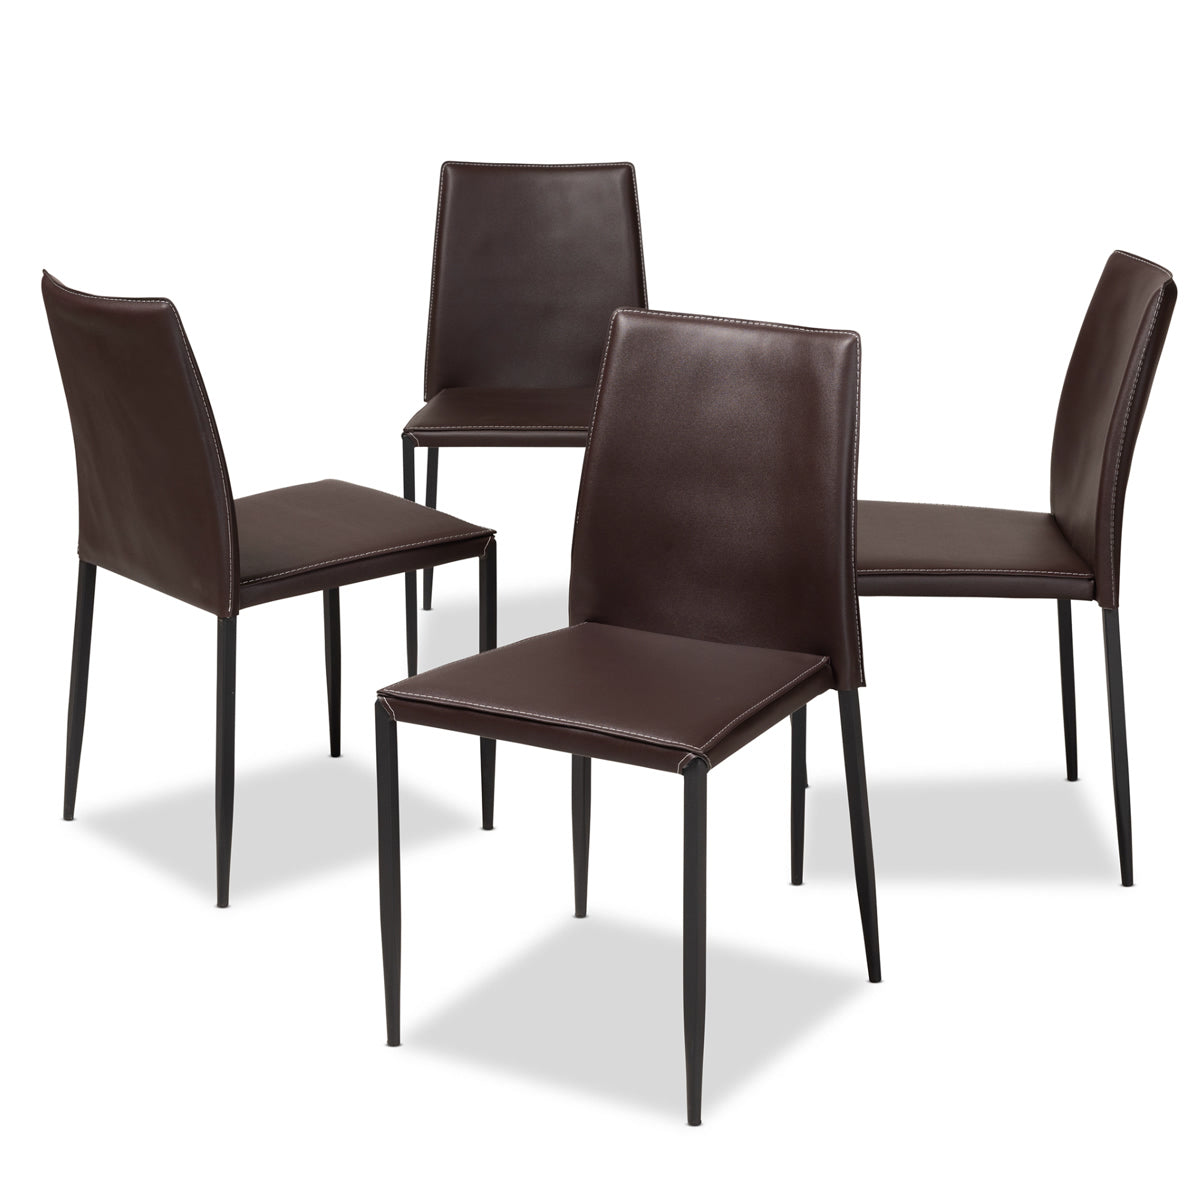 Baxton Studio Pascha Modern and Contemporary Brown Faux Leather Upholstered Dining Chair (Set of 4) Baxton Studio-dining chair-Minimal And Modern - 1